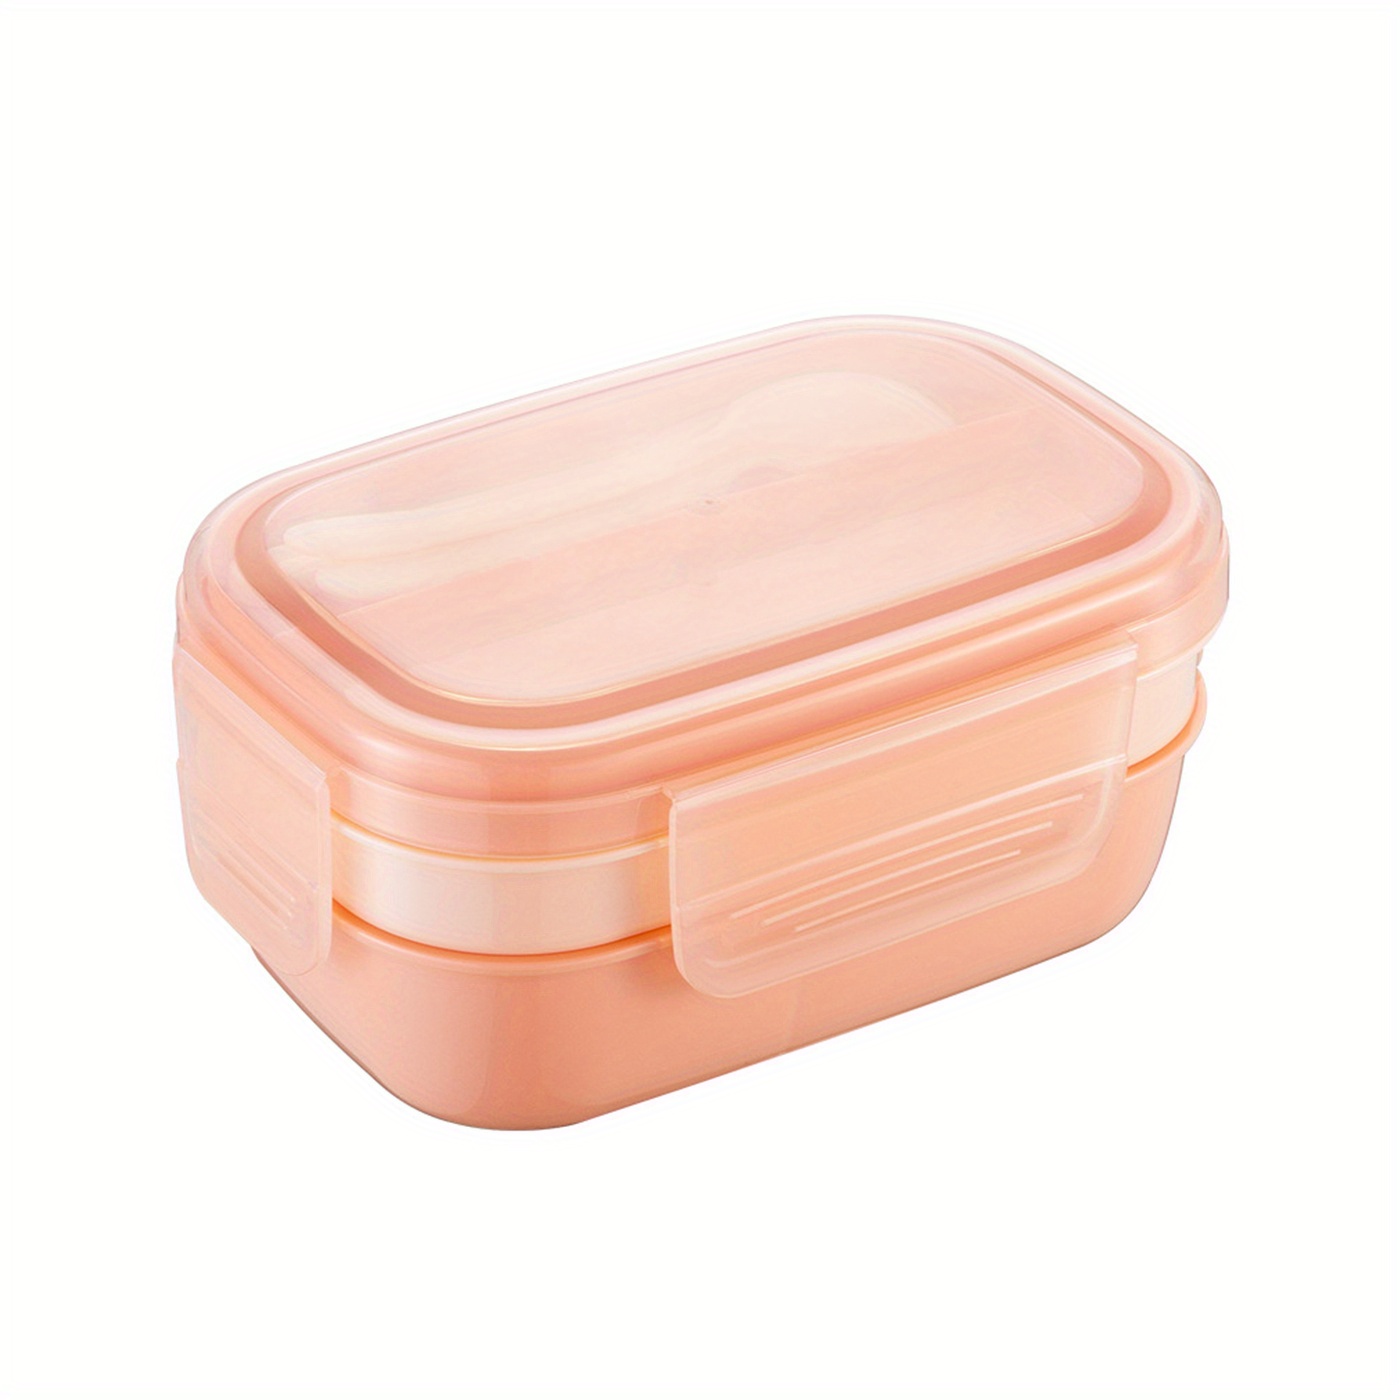 JBGOYON® Bento box adult Lunch Box with Bag, 3 Stackable Lunch Containers  for Kids Adult, Minimalist…See more JBGOYON® Bento box adult Lunch Box with